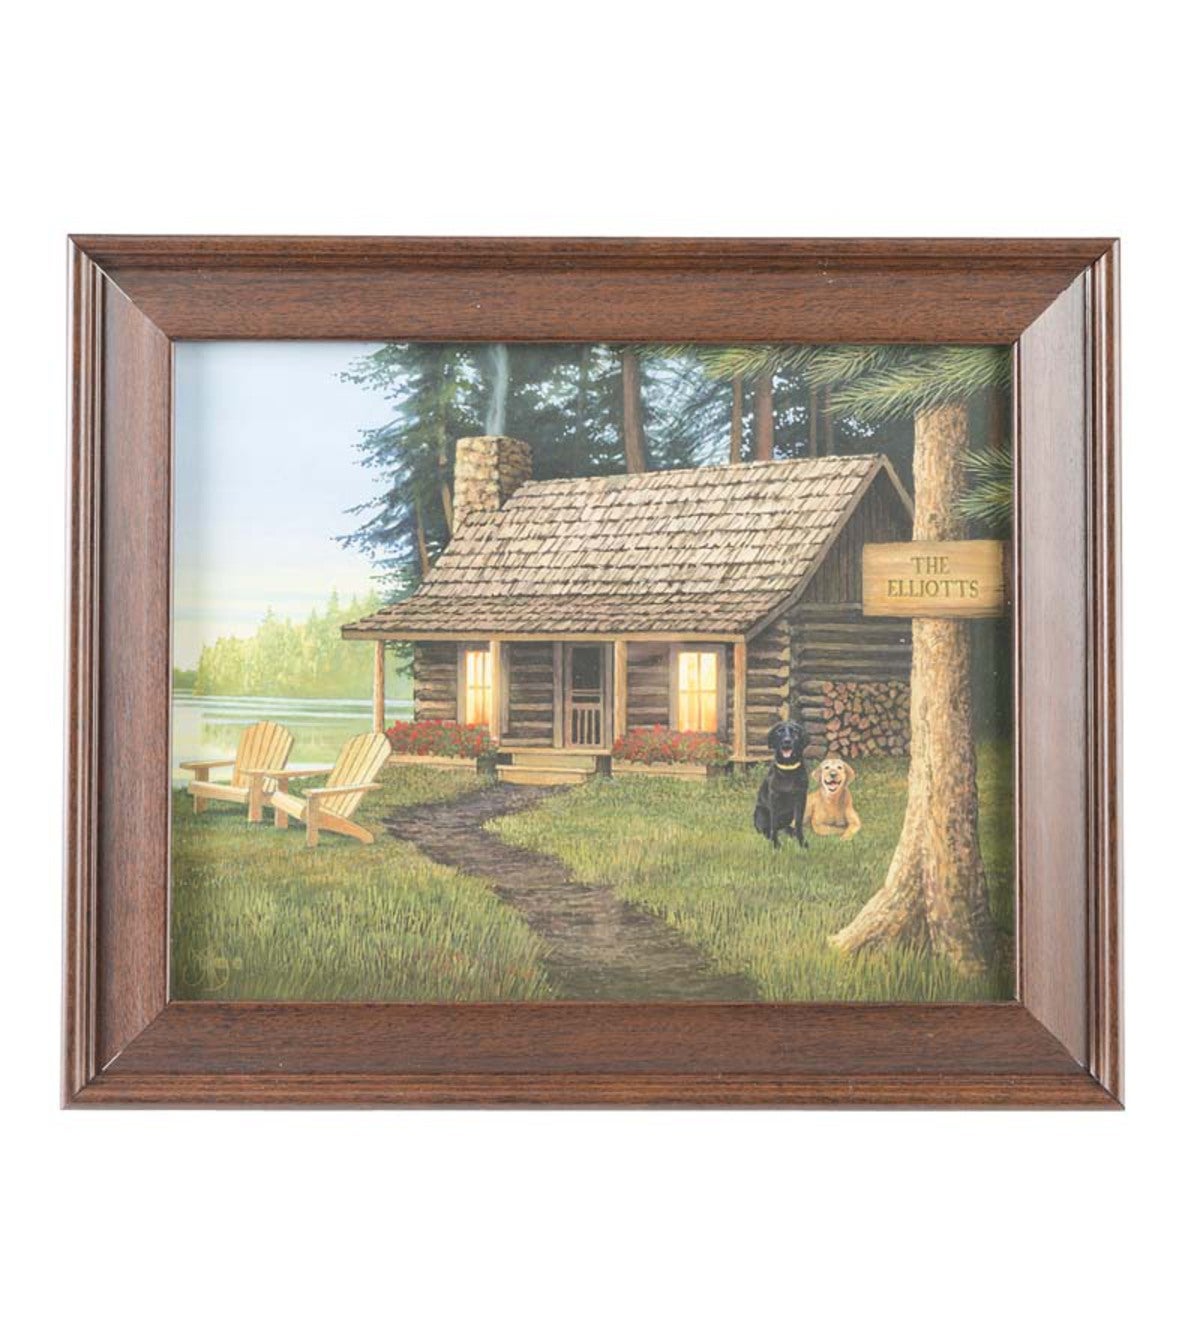 Personalized Cabin Framed Print